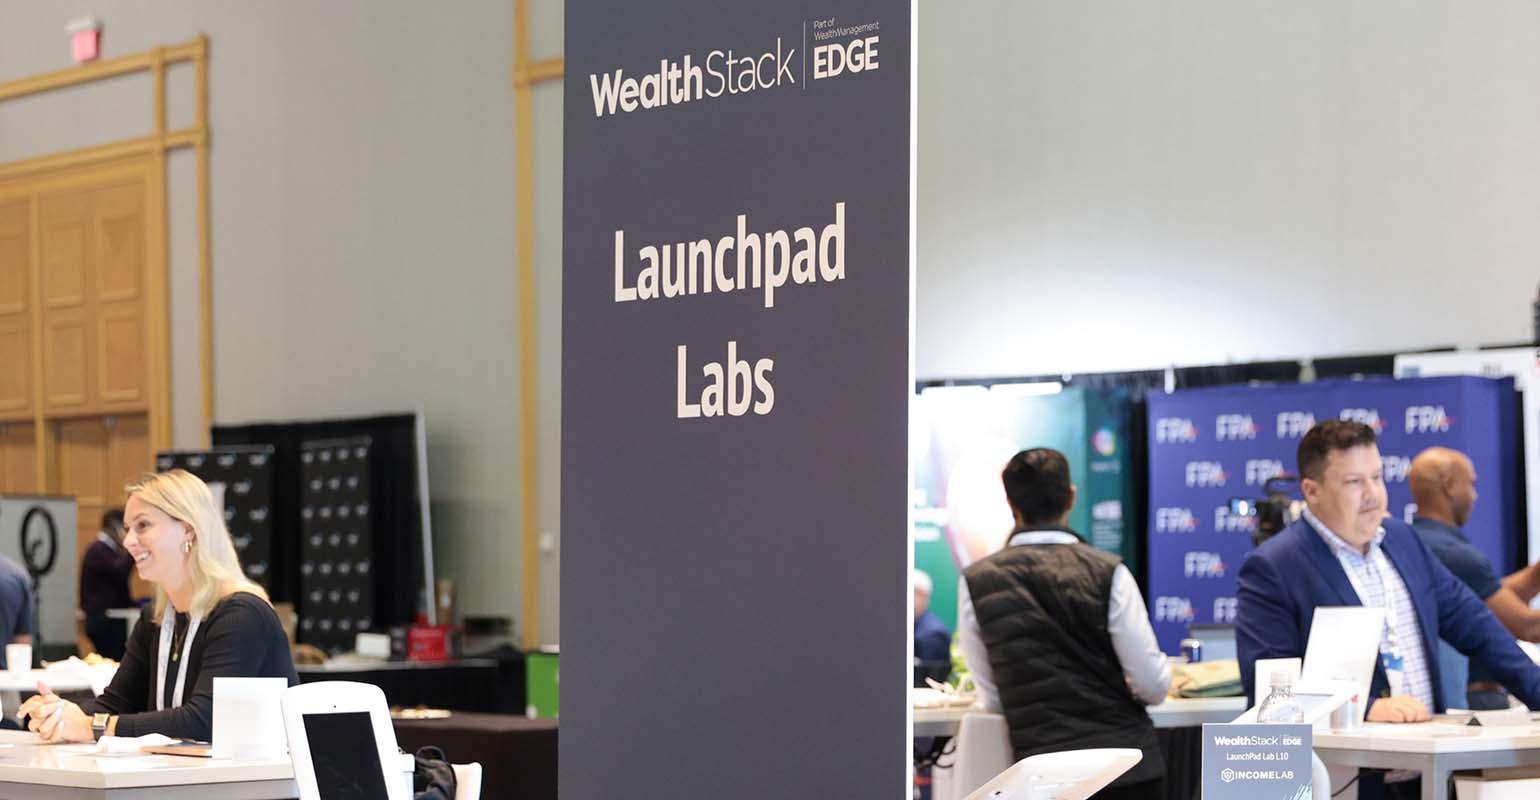 At WealthStack, Smaller Firms Inspire and Some Need a History Lesson